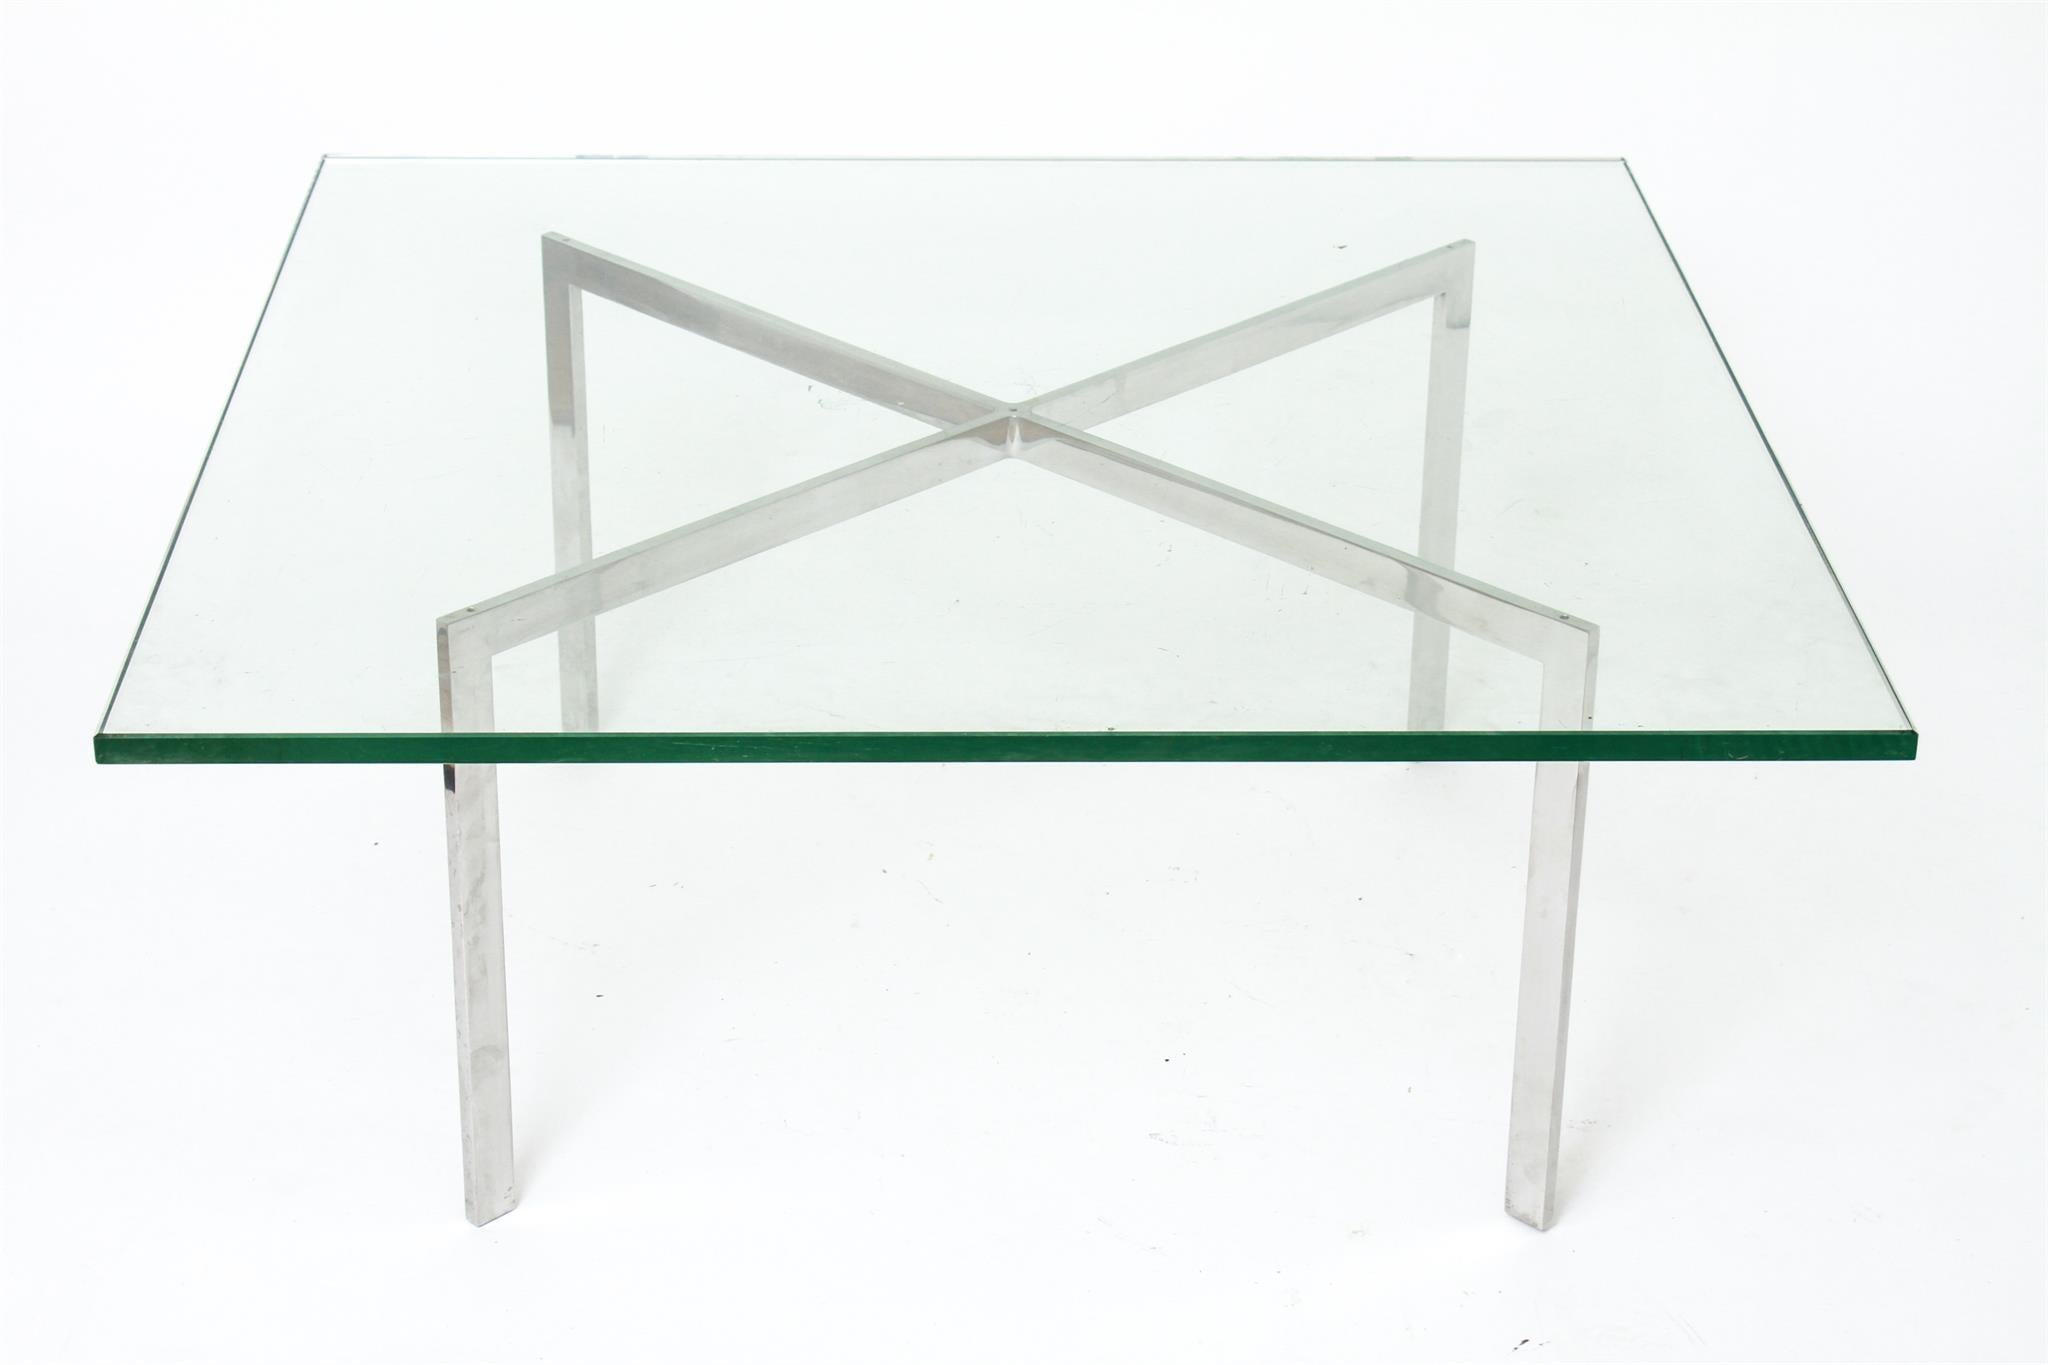 Modernist Barcelona coffee or cocktail table designed originally by Ludwig Mies van der Rohe in 1929 and re-edited by Knoll in the mid-20th century. The table features an X-shaped base with a polished chrome finish and a thick square glass top.